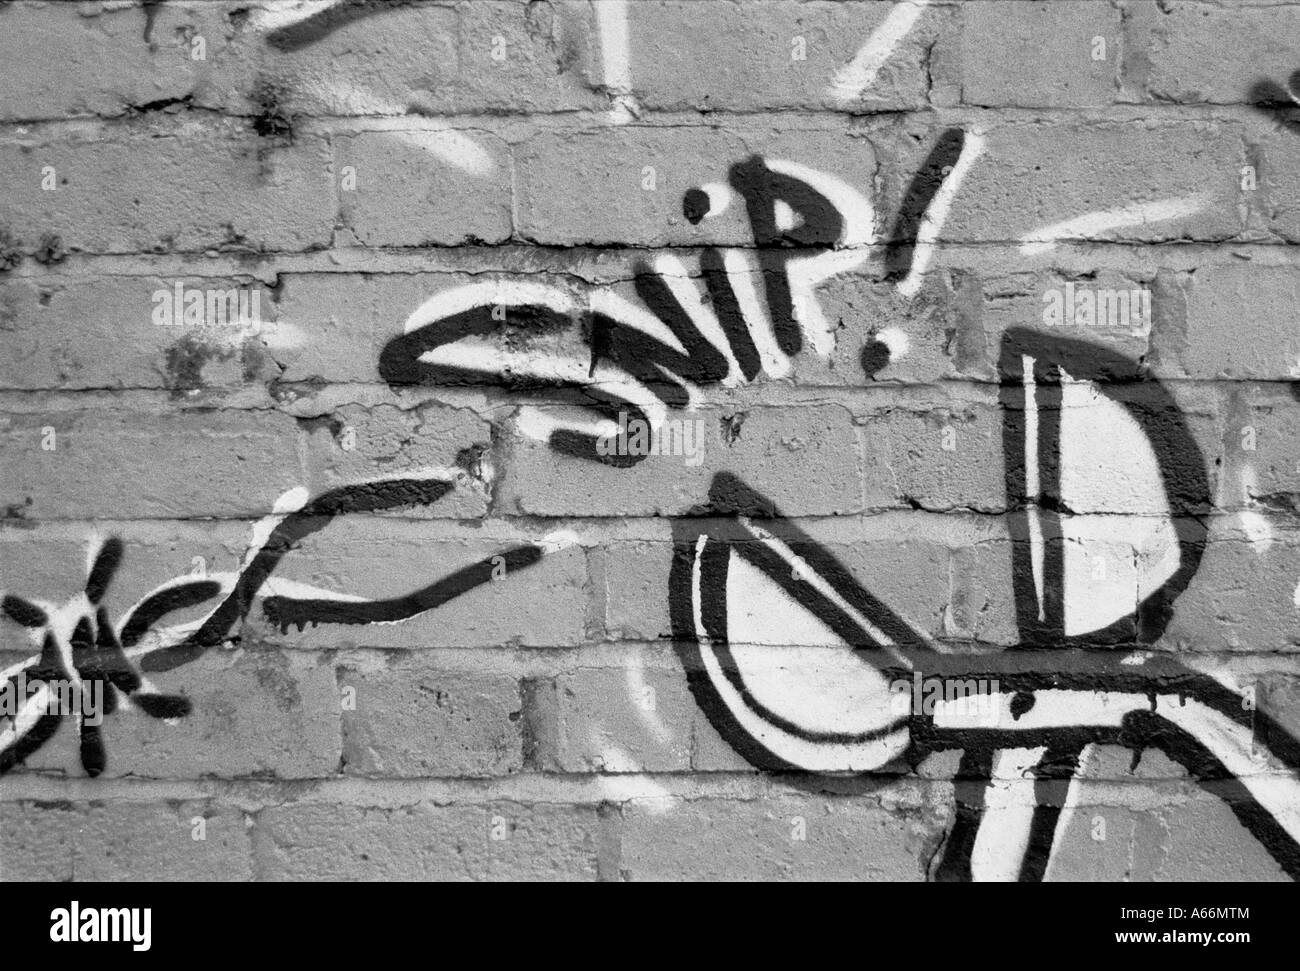 Wire cutters snip through barbed wire, black & white image of a graffiti mural, Meadow Lane, Oxford, UK 2004 Stock Photo